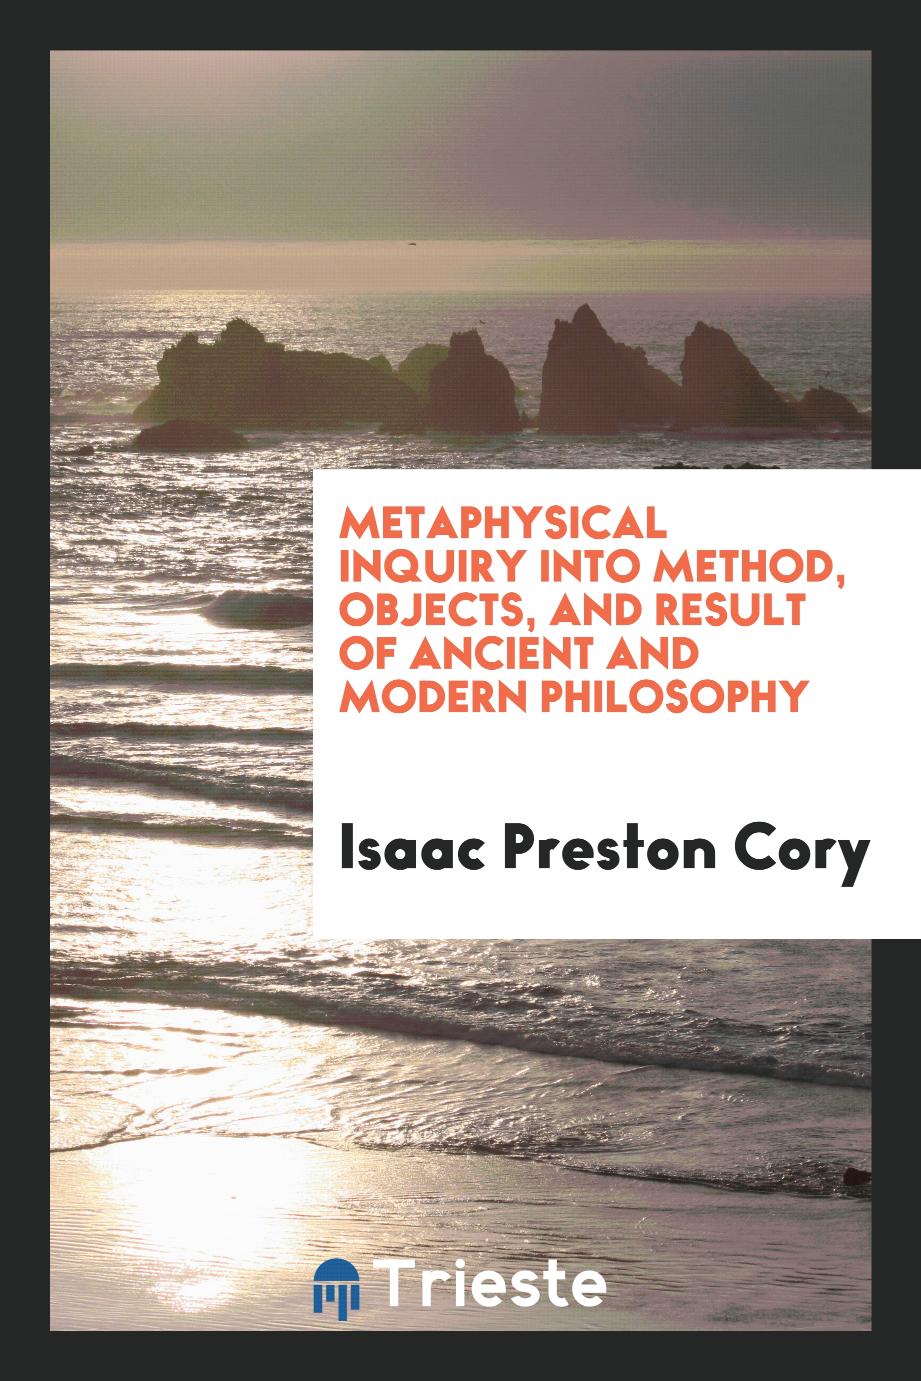 Metaphysical inquiry into method, objects, and result of ancient and modern philosophy